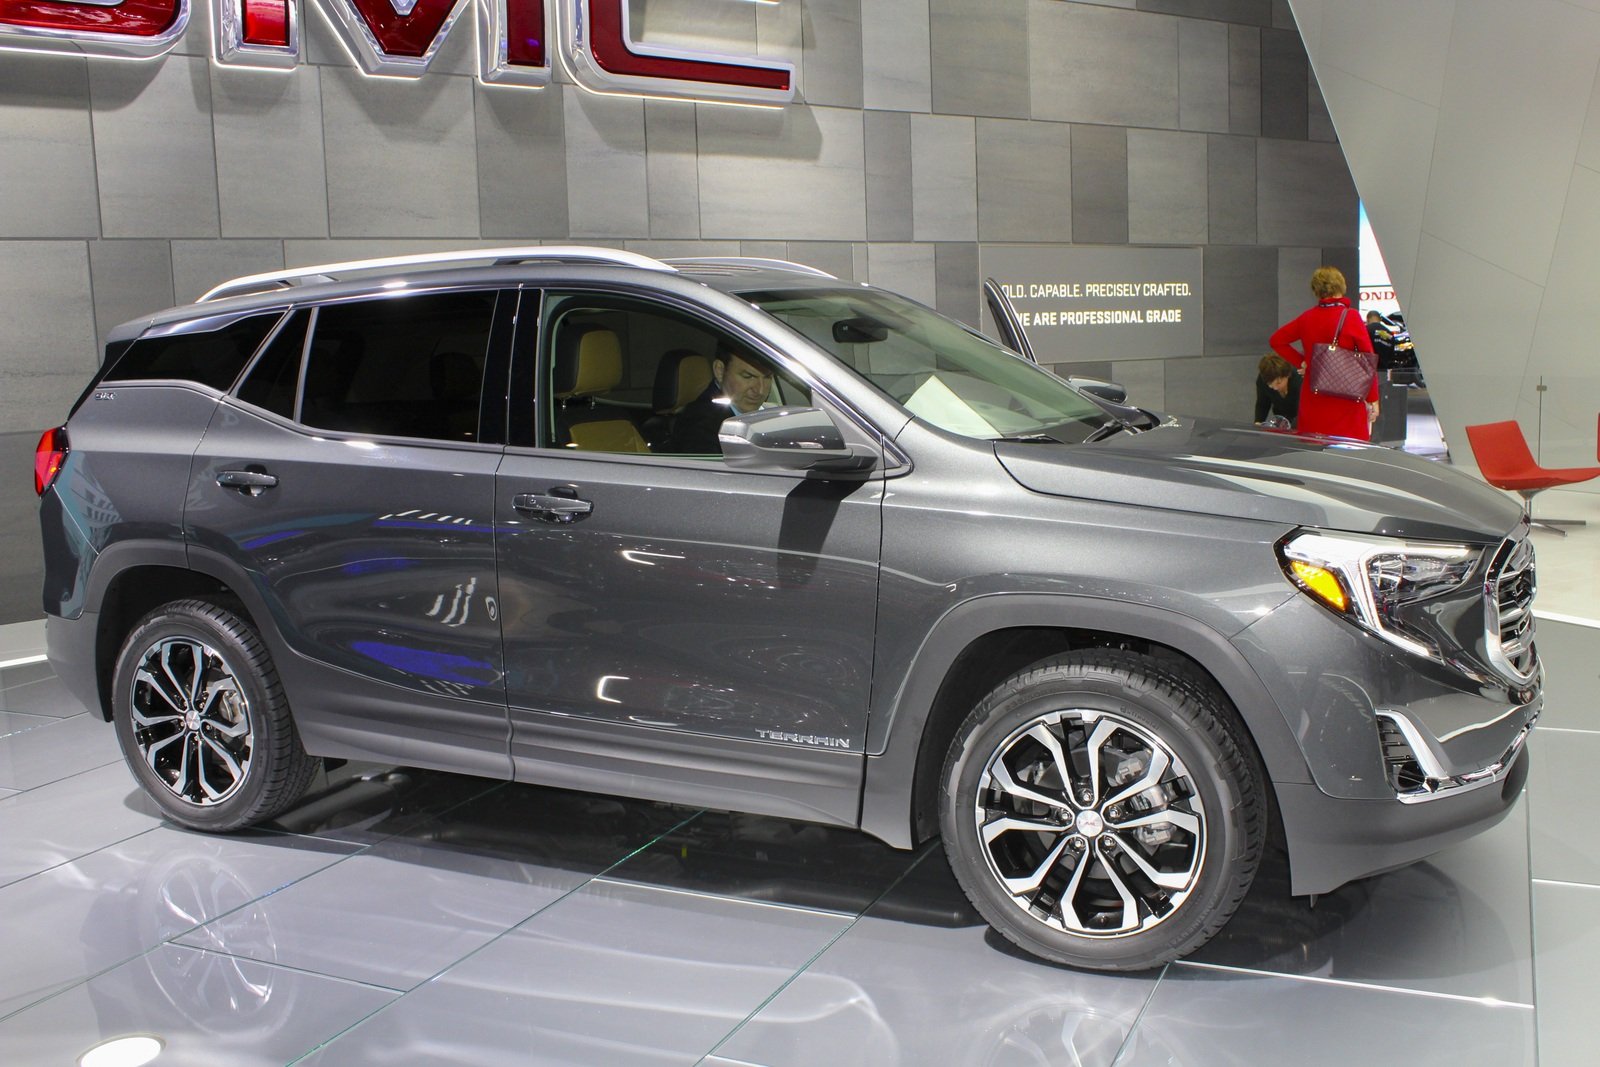 Our list of diesel cars includes the GMC Terrain